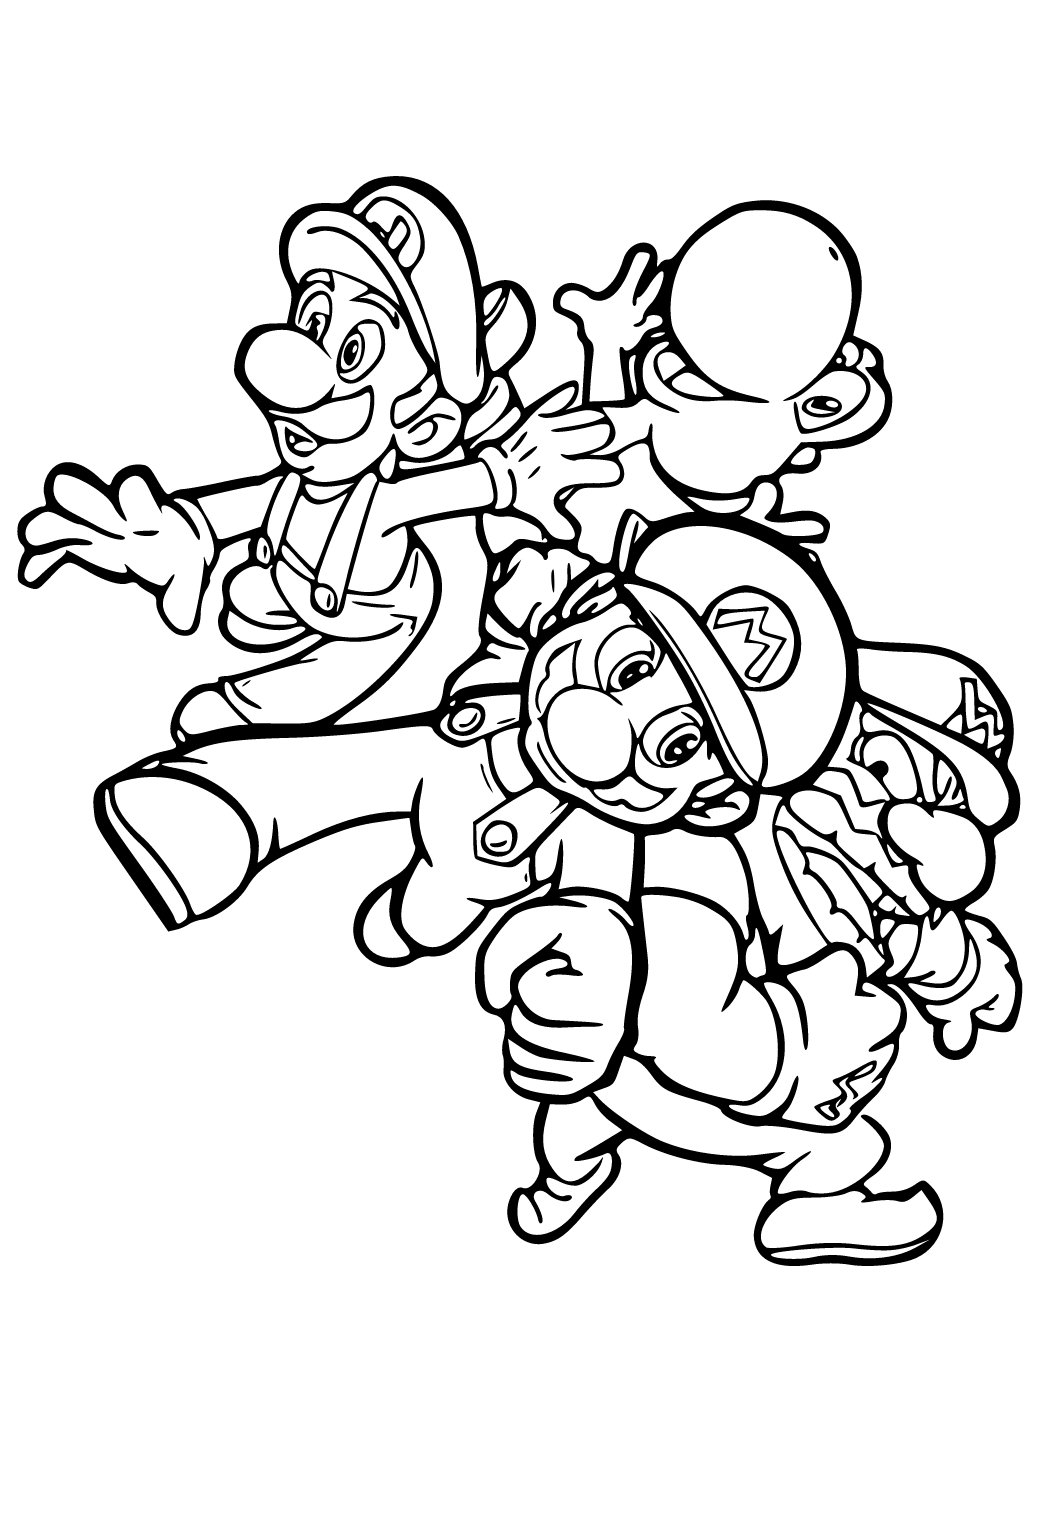 Free printable super mario characters coloring page for adults and kids